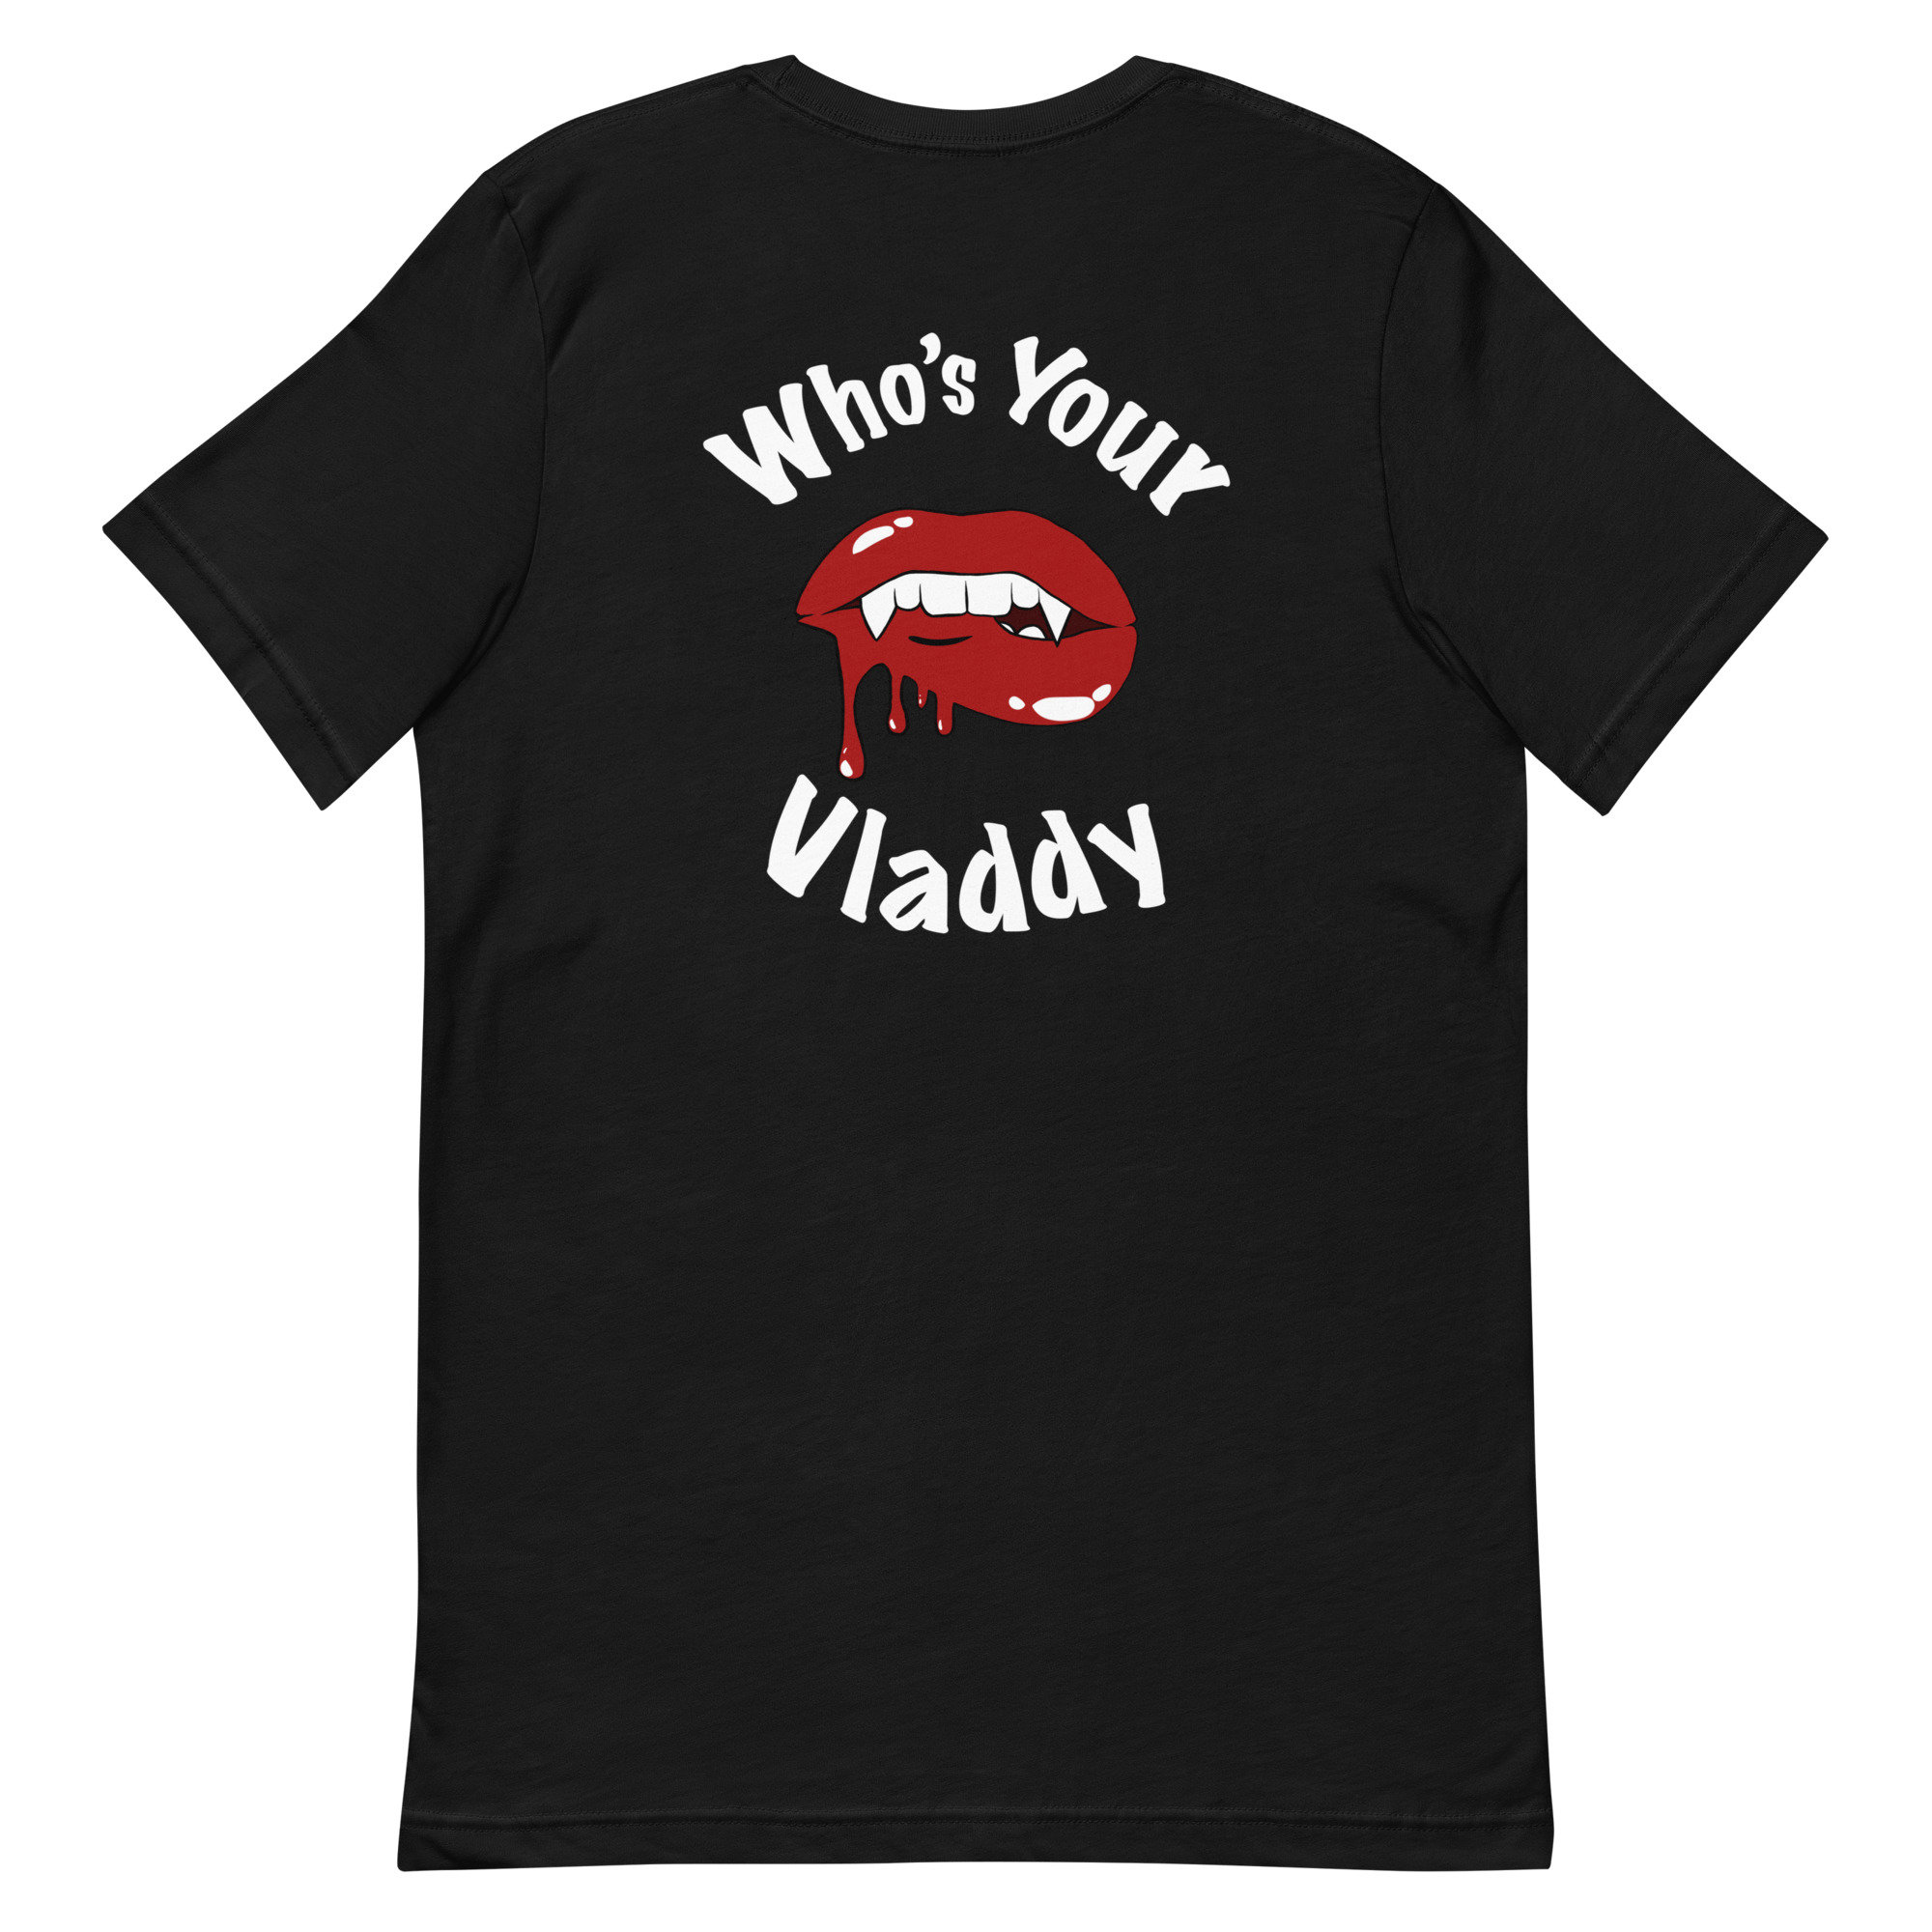 Who_s Your Vladdy, Vladimir Guerrero Jr, cool gift idea for a friend, dad,  mom, Premium | Classic T-Shirt